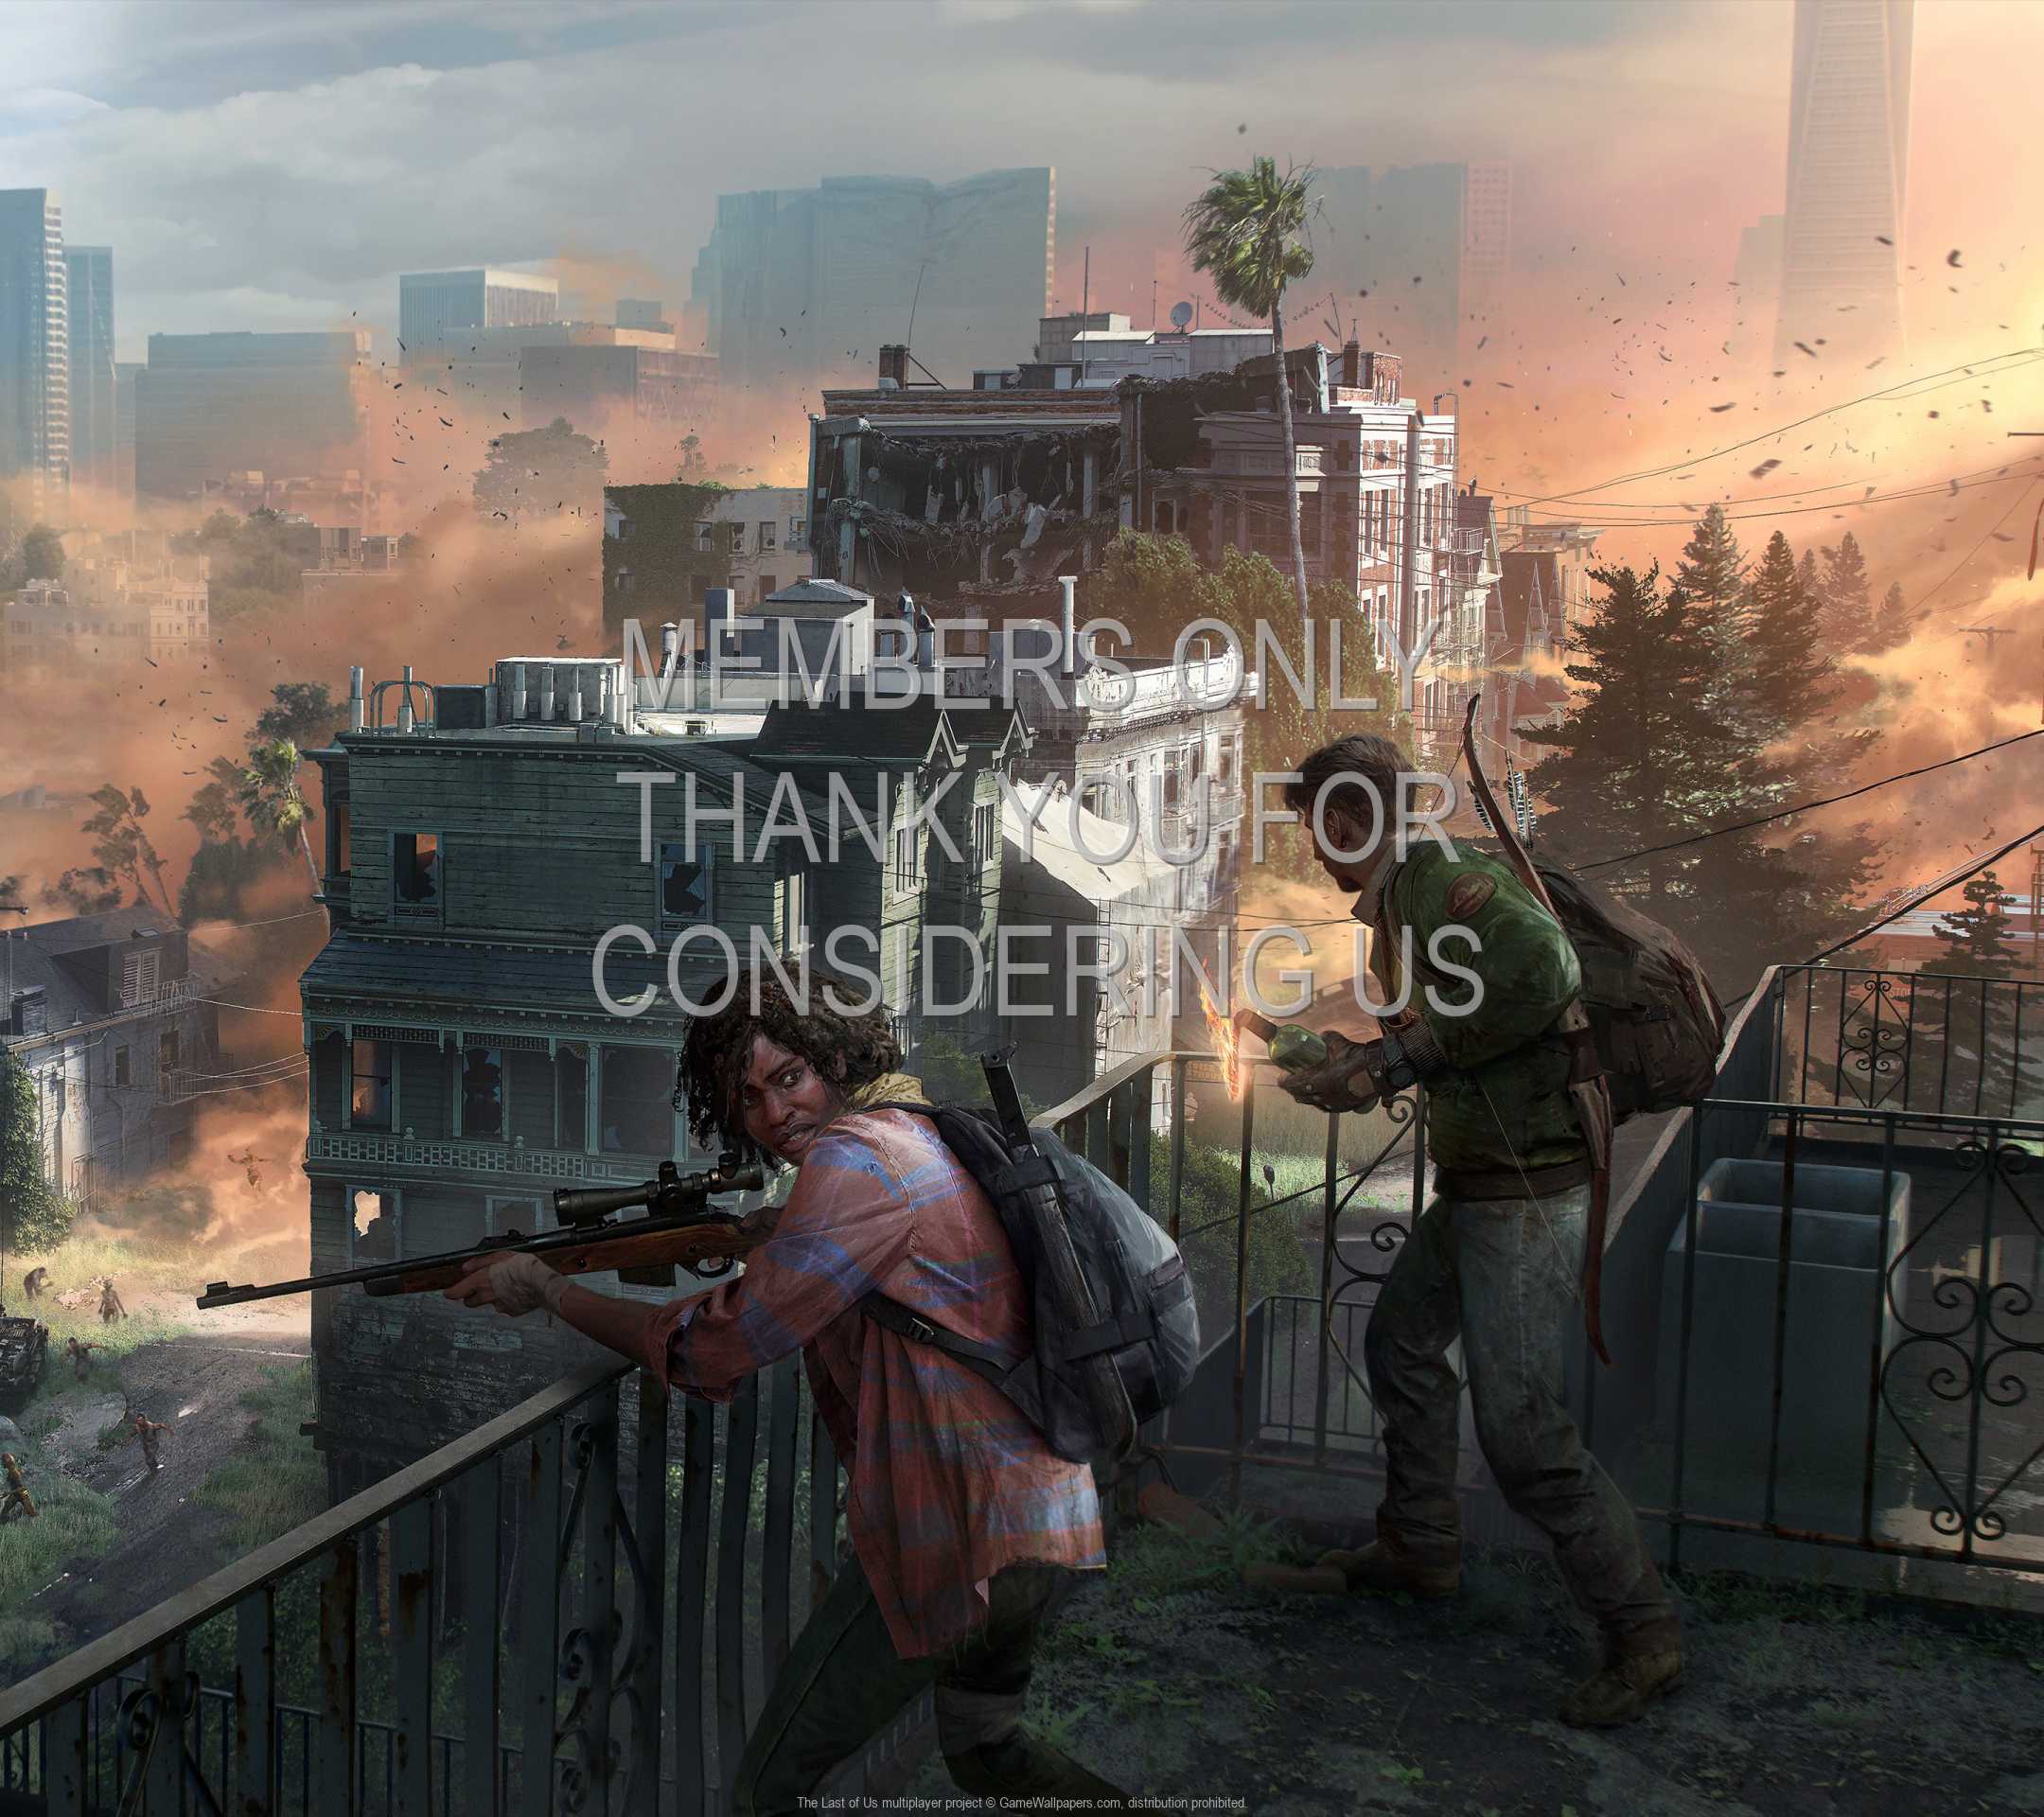 The Last of Us multiplayer project 1080p Horizontal Mobile wallpaper or background 01